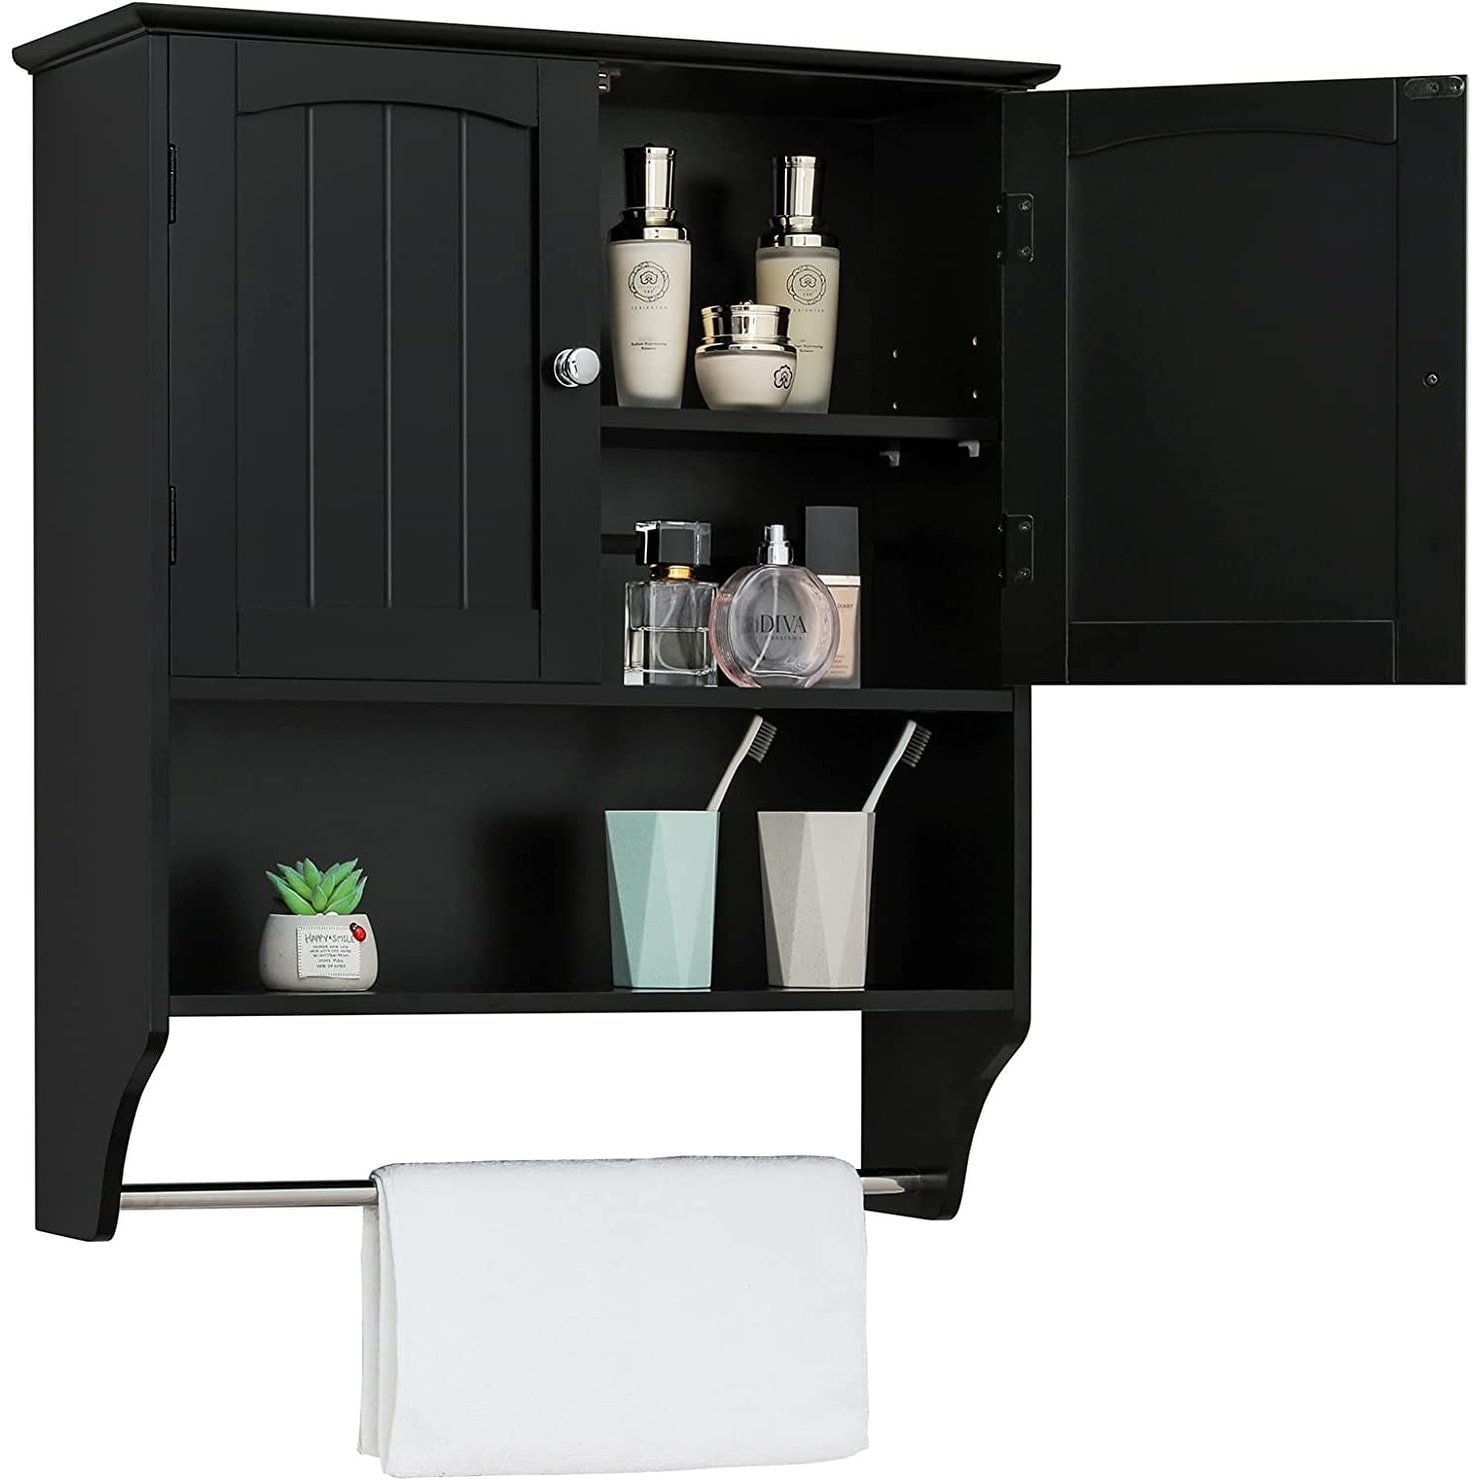 https://ak1.ostkcdn.com/images/products/is/images/direct/1097b31fd8750f2c63da159d48b74b44a1a1eb7d/Wall-Bathroom-Cabinet-with-2-Shelf-%26amp%3B-Towels-Bar%2C-Medicine-Cabinet-with-2-Doors-for-Bathroom.jpg